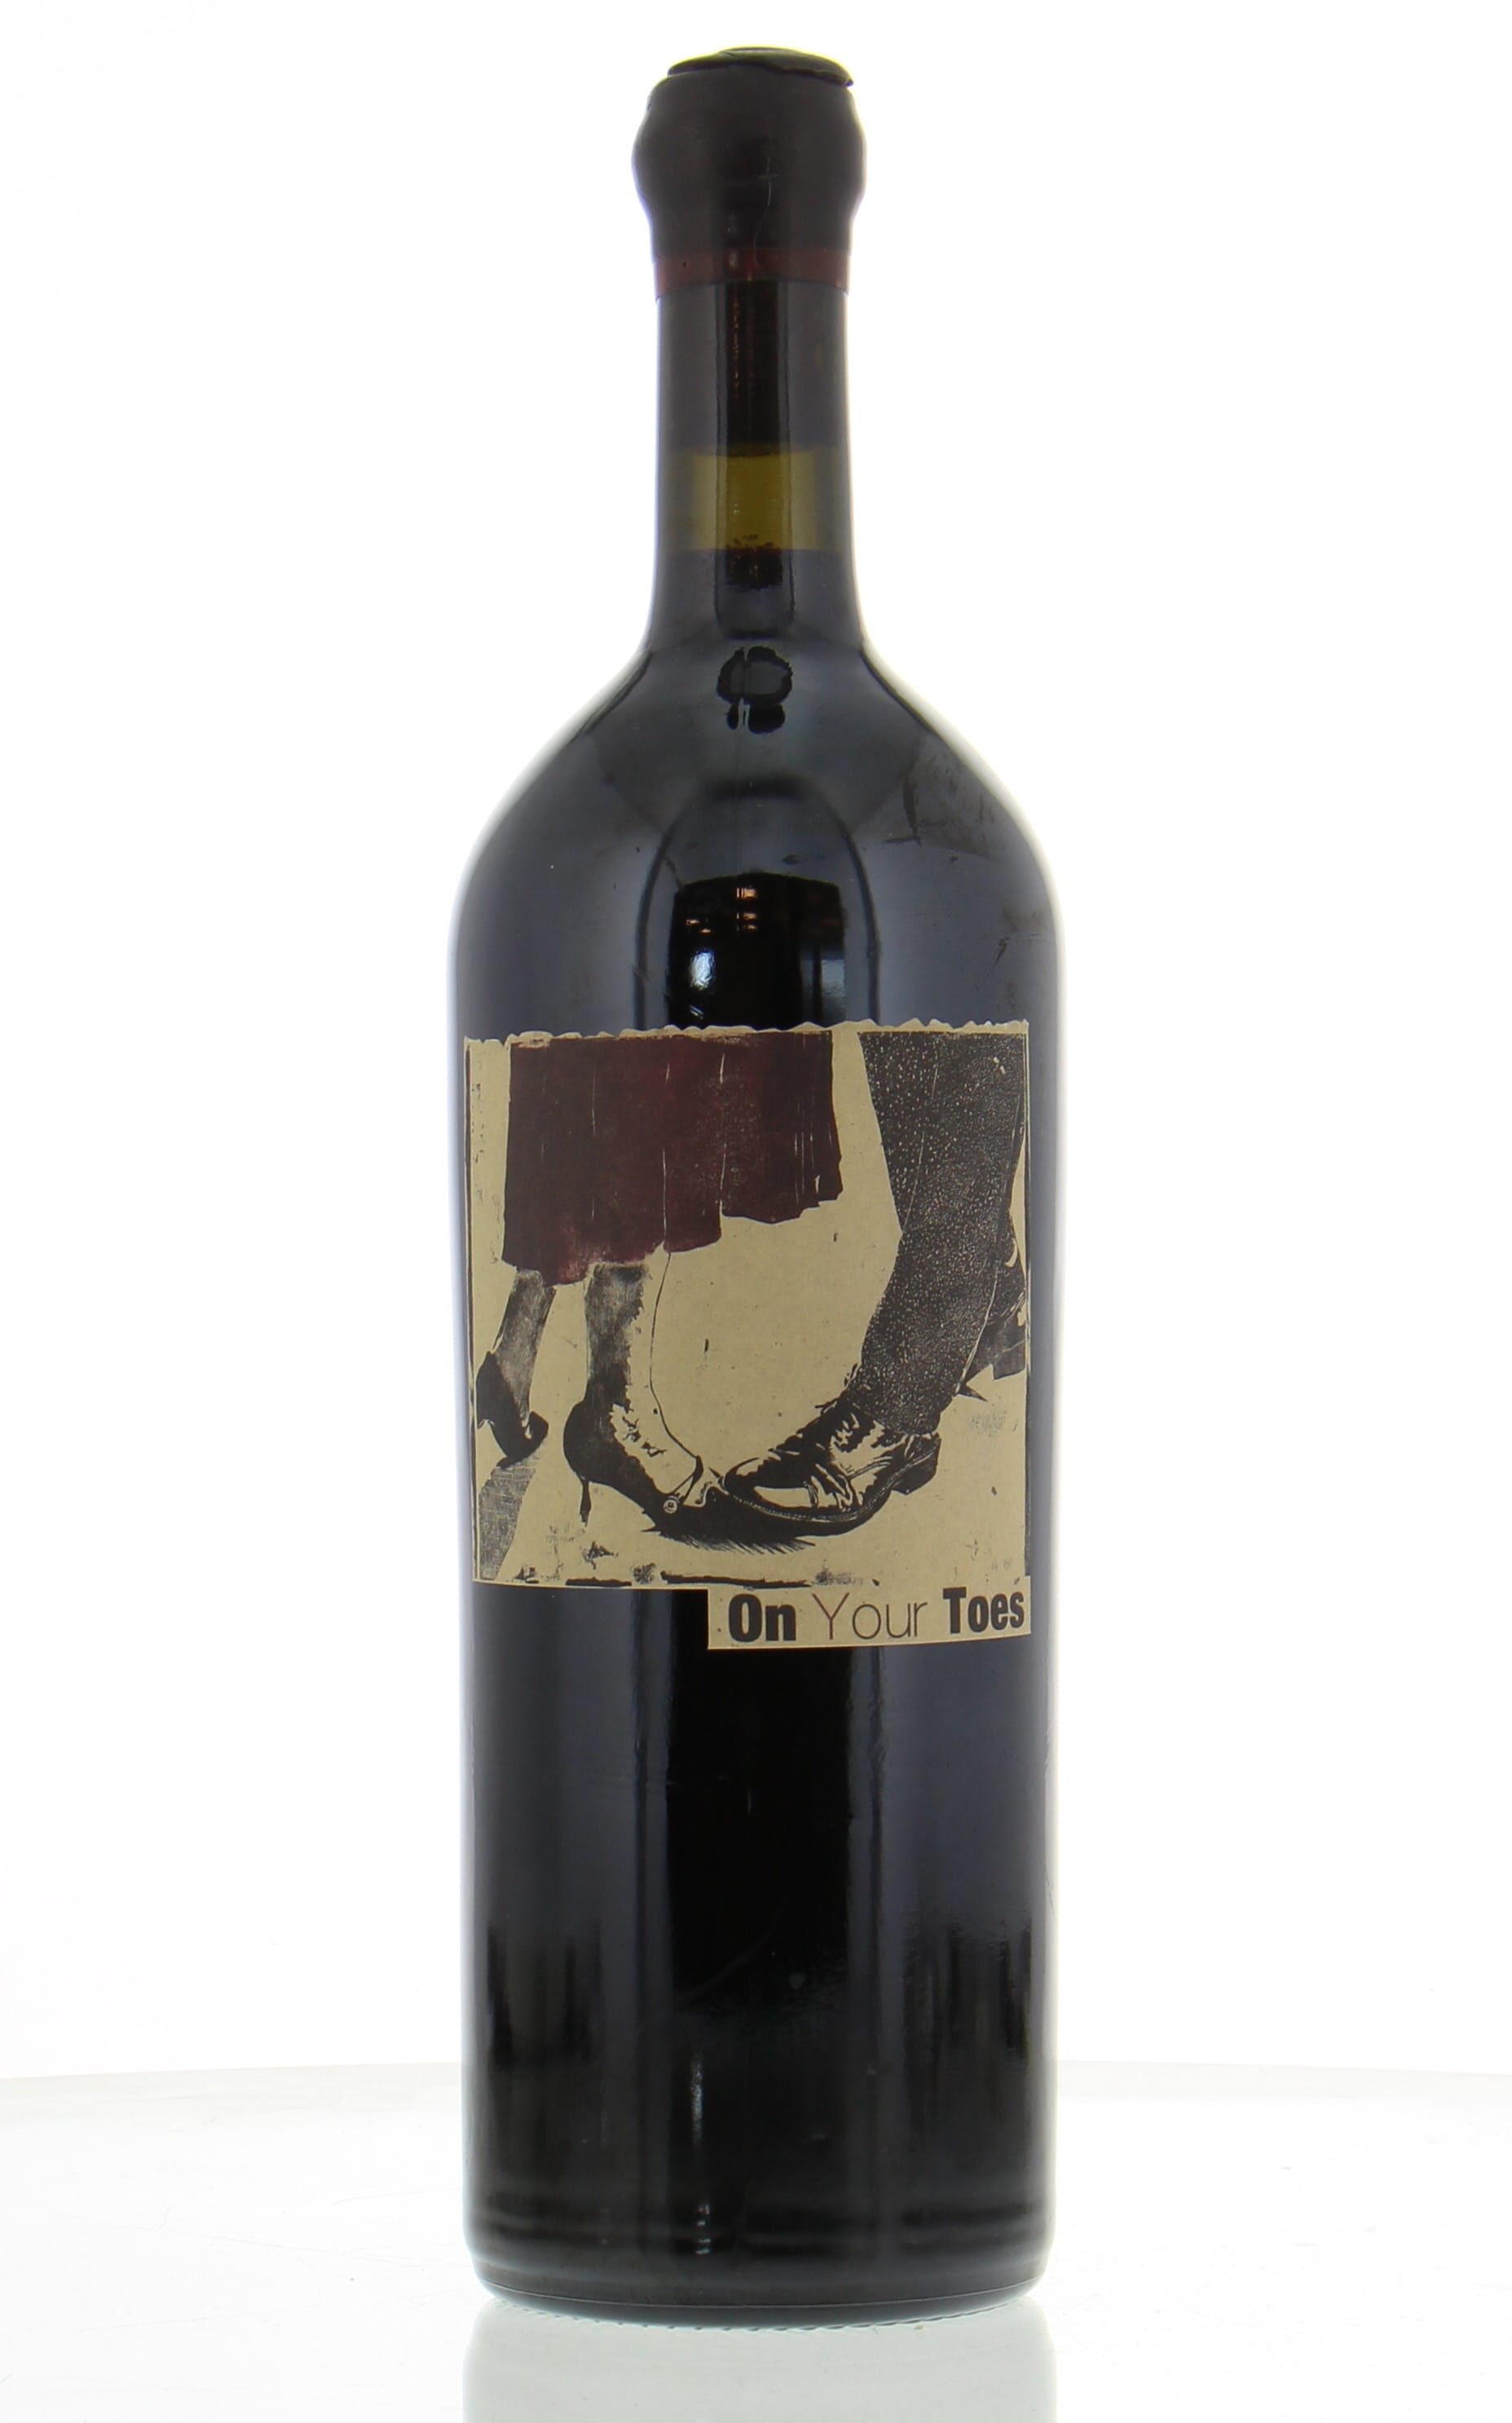 Sine Qua Non - On your Toes Syrah 2001 Top wax capsule damaged